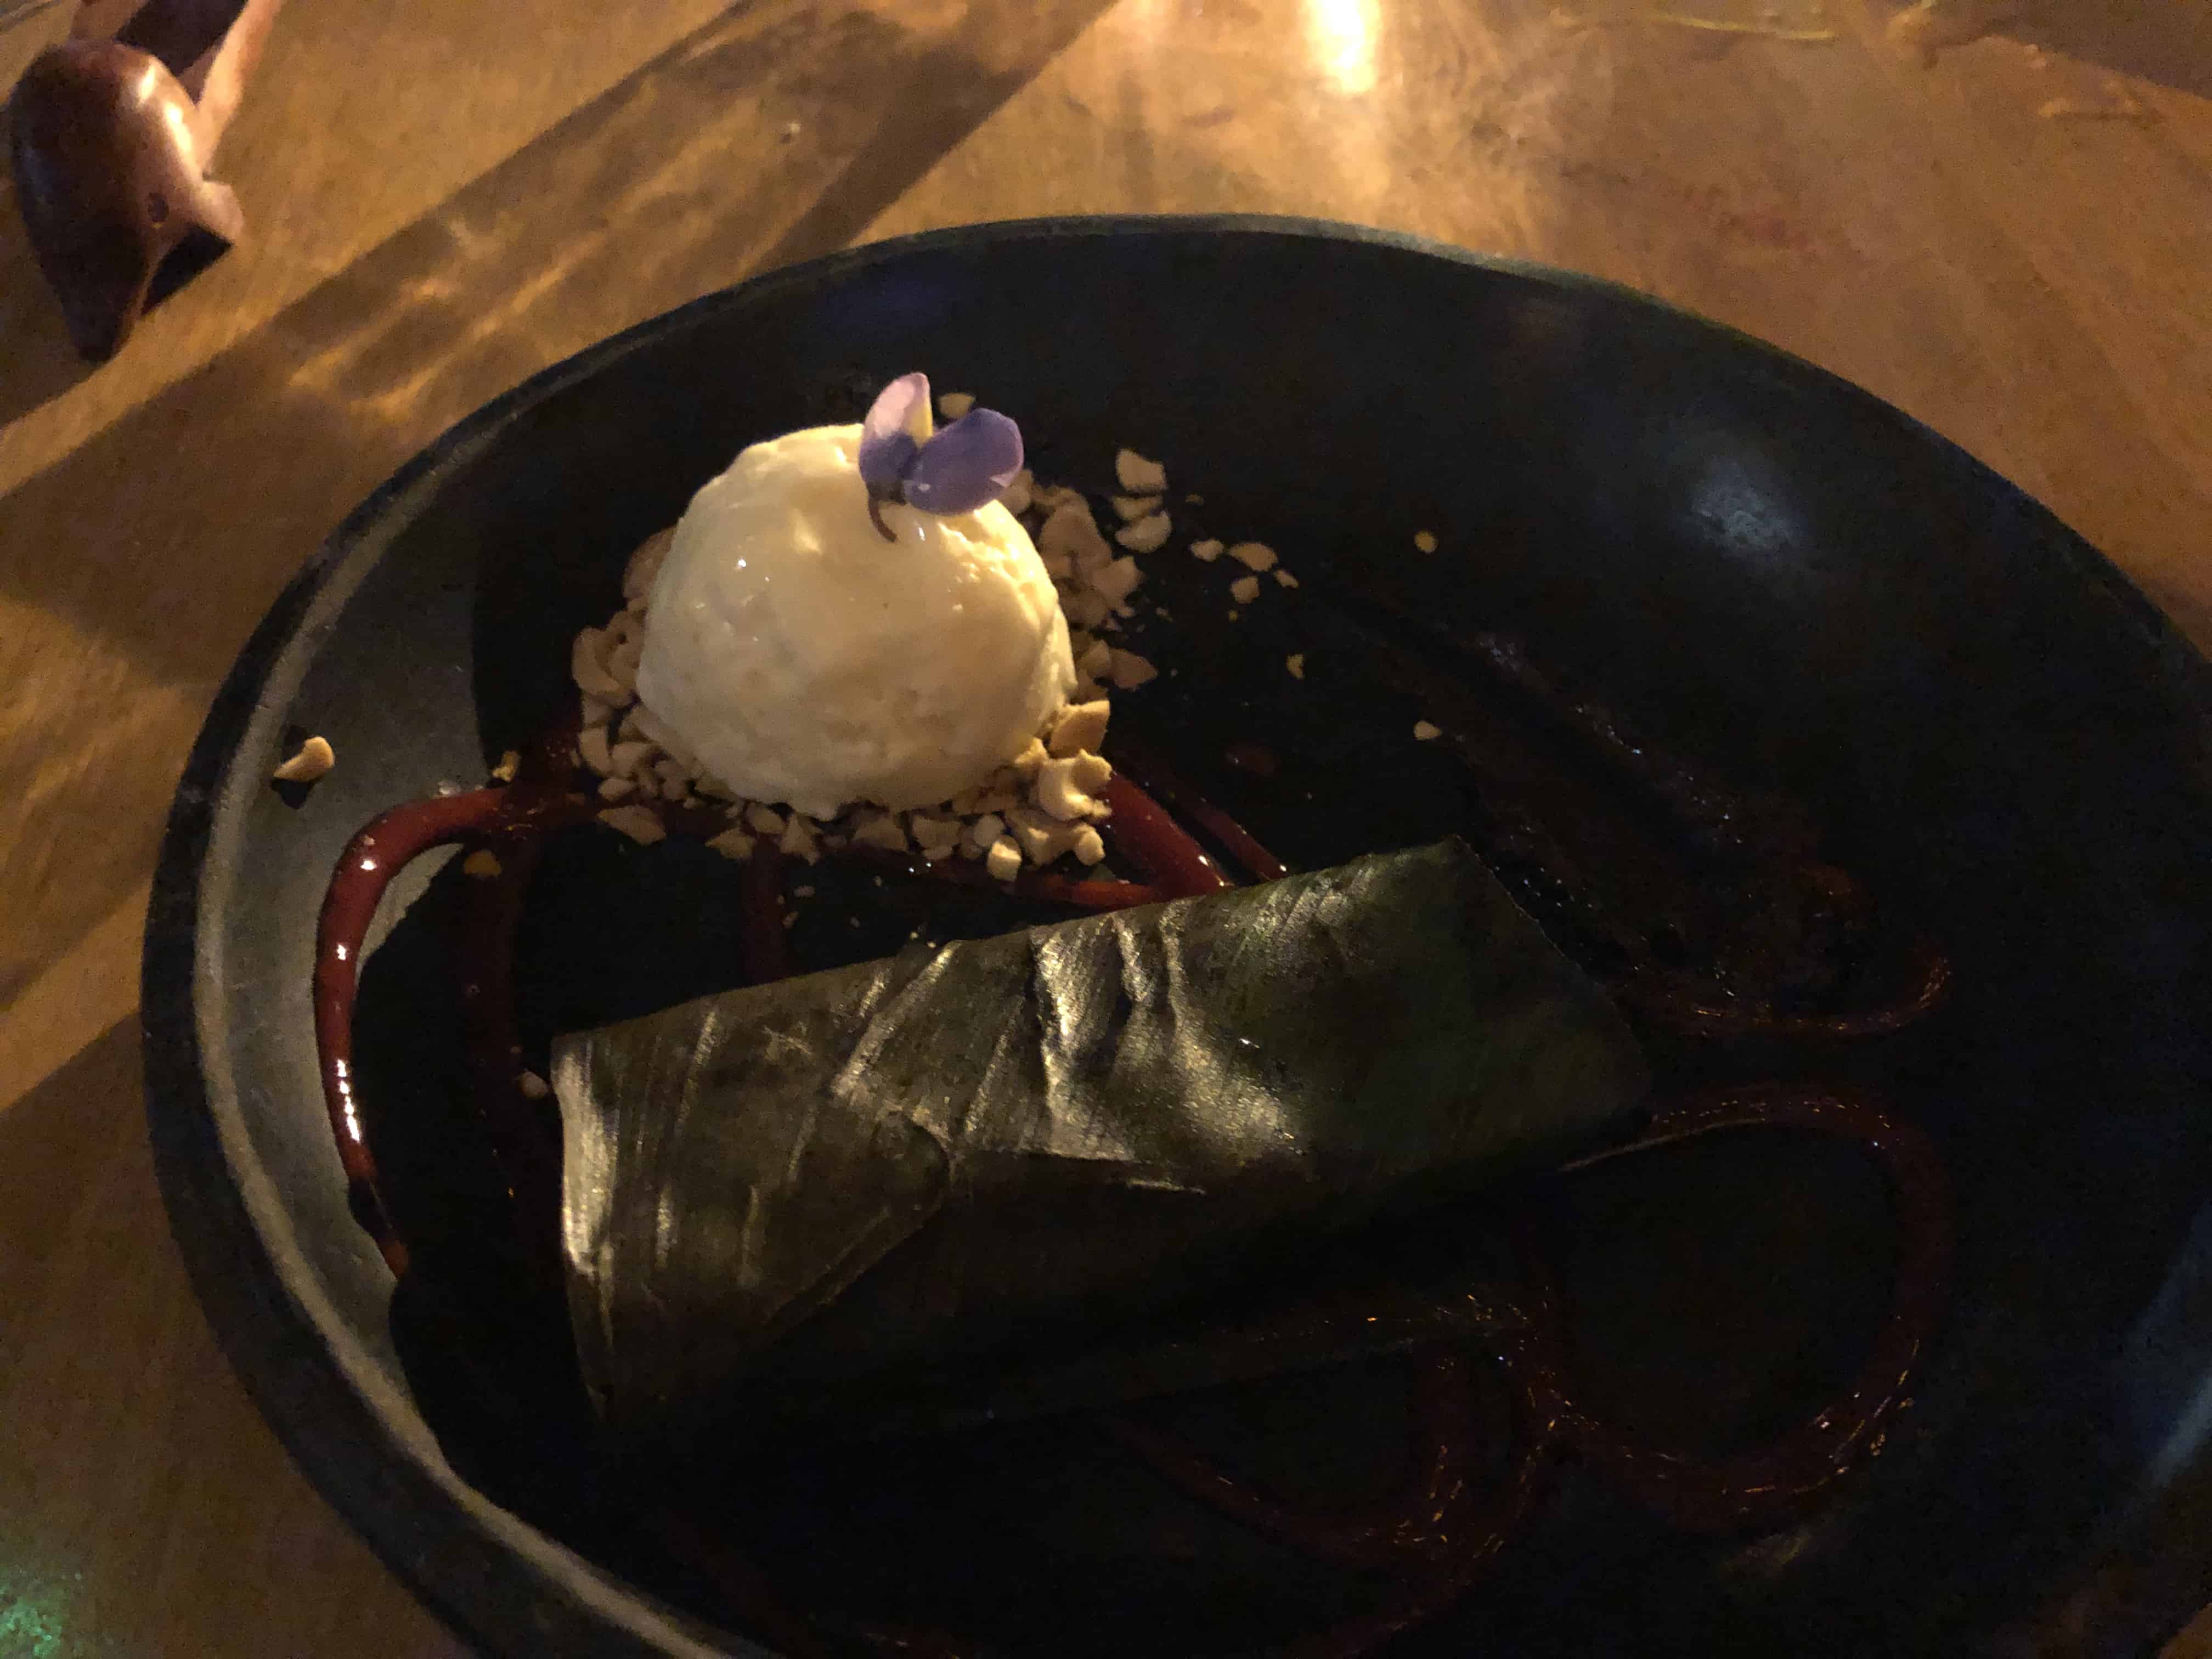 Brownie wrapped in a leaf served with ice cream at Juräkub in El Poblado, Medellín, Antioquia, Colombia